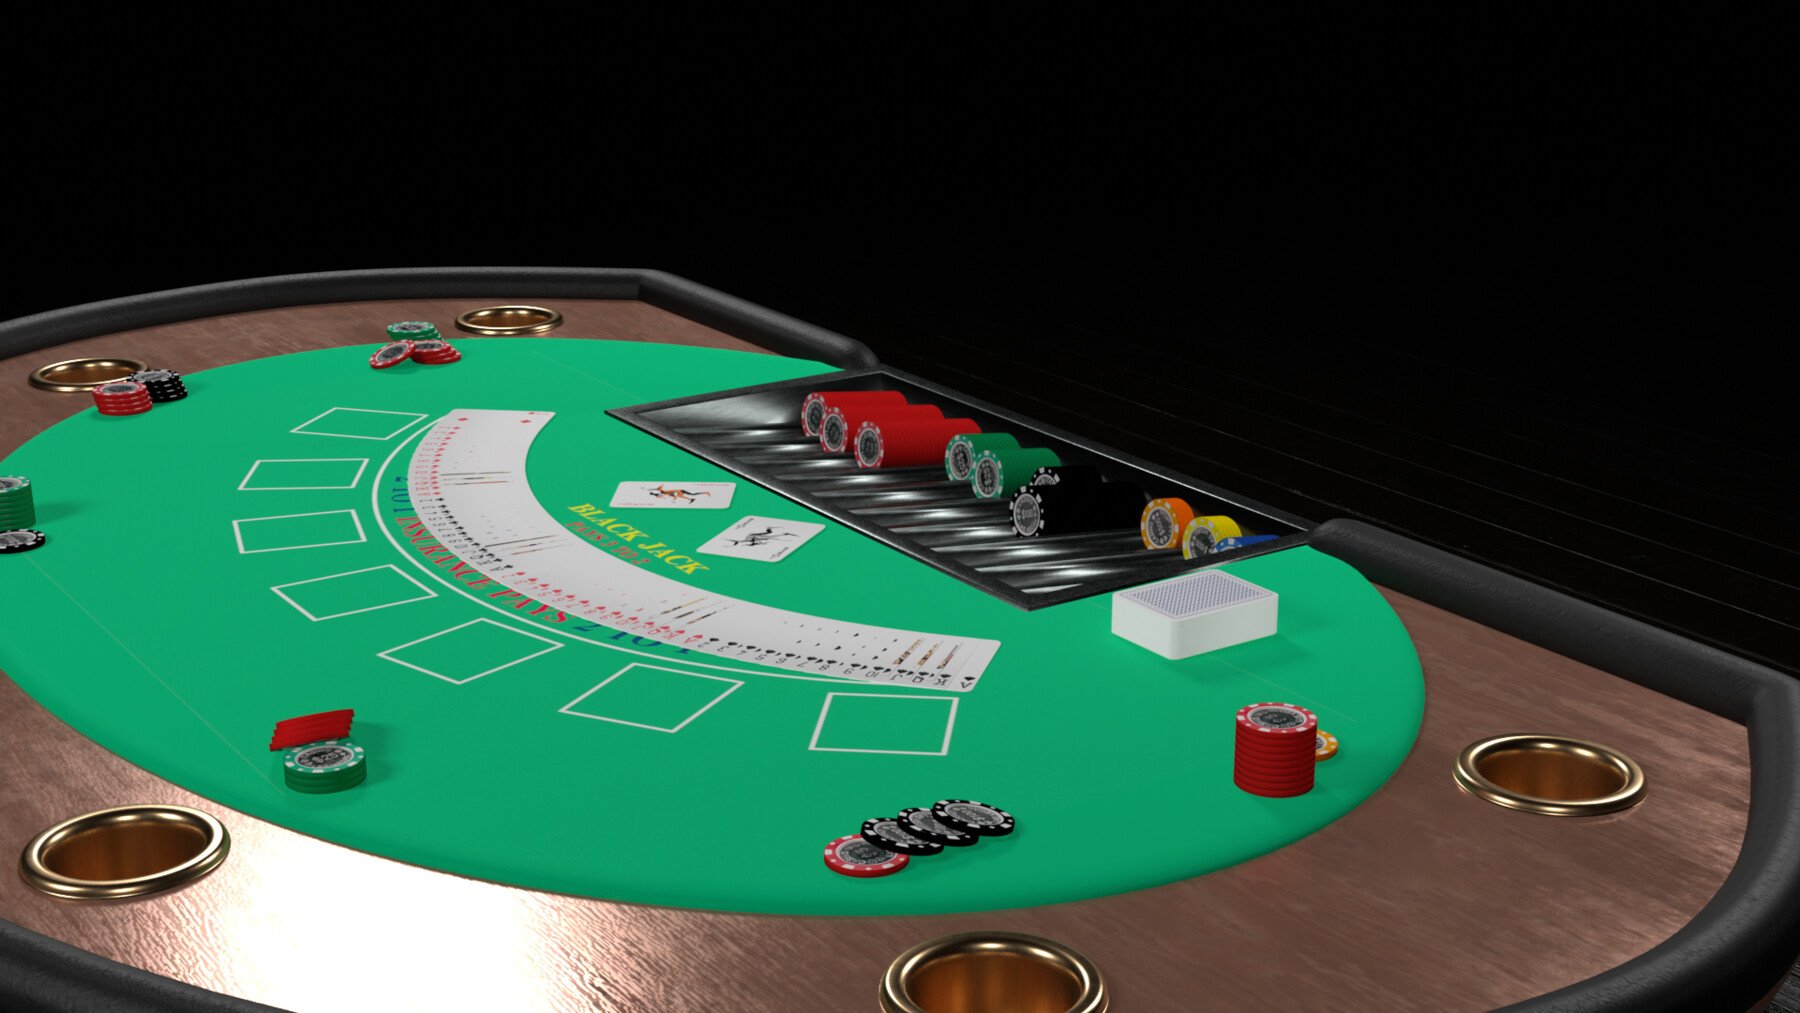 How To Make a Poker Table